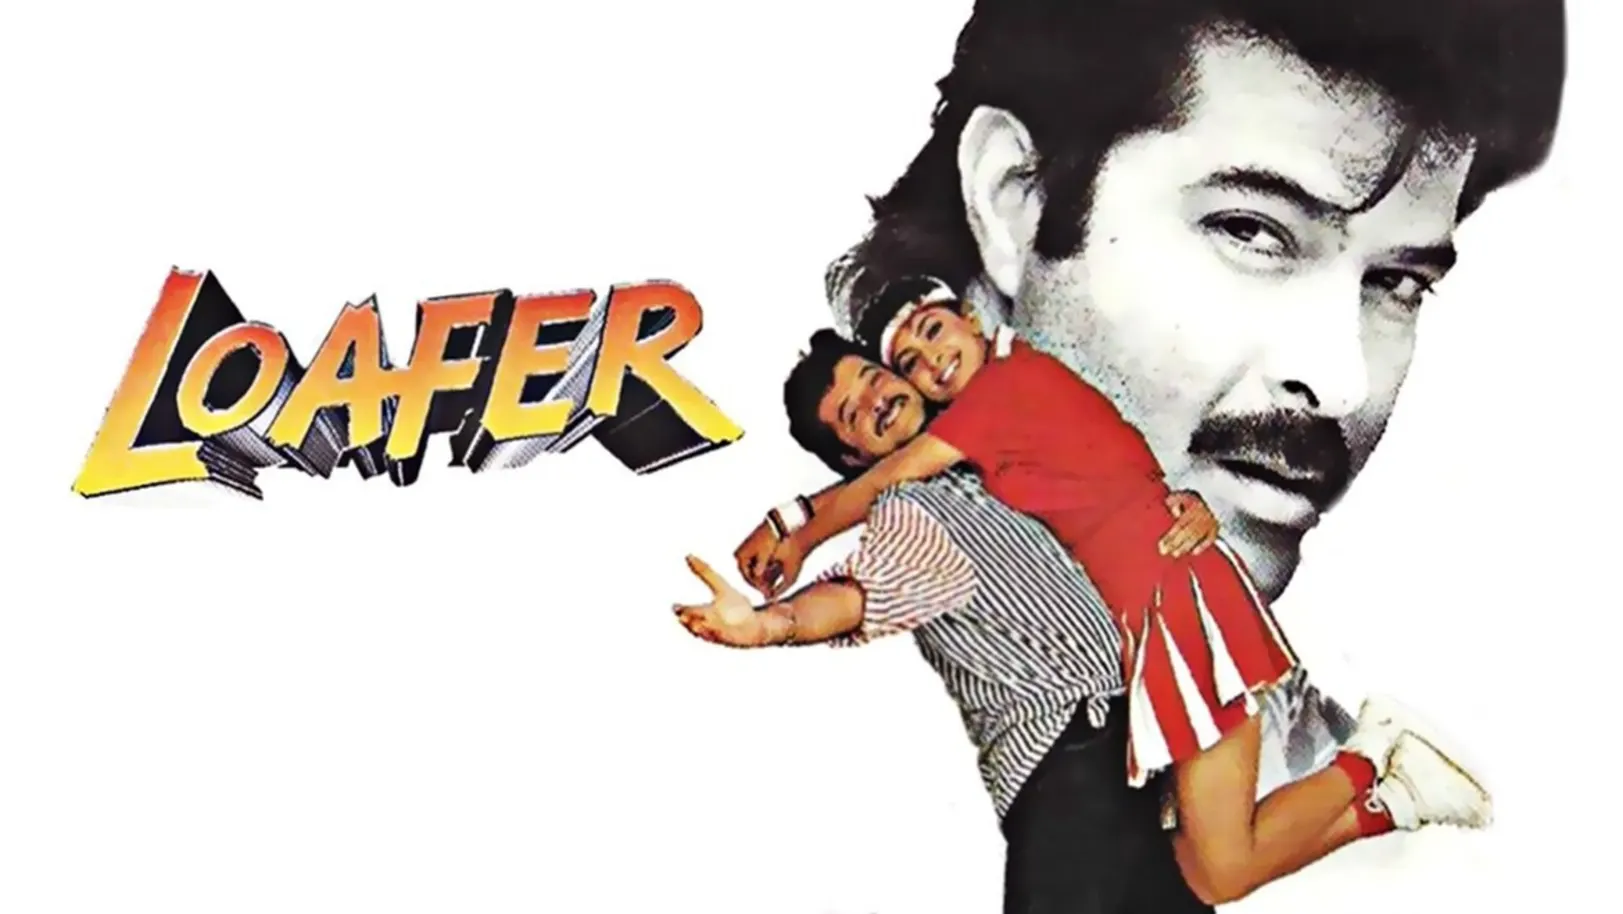 Loafer Streaming Now On Zee Bollywood